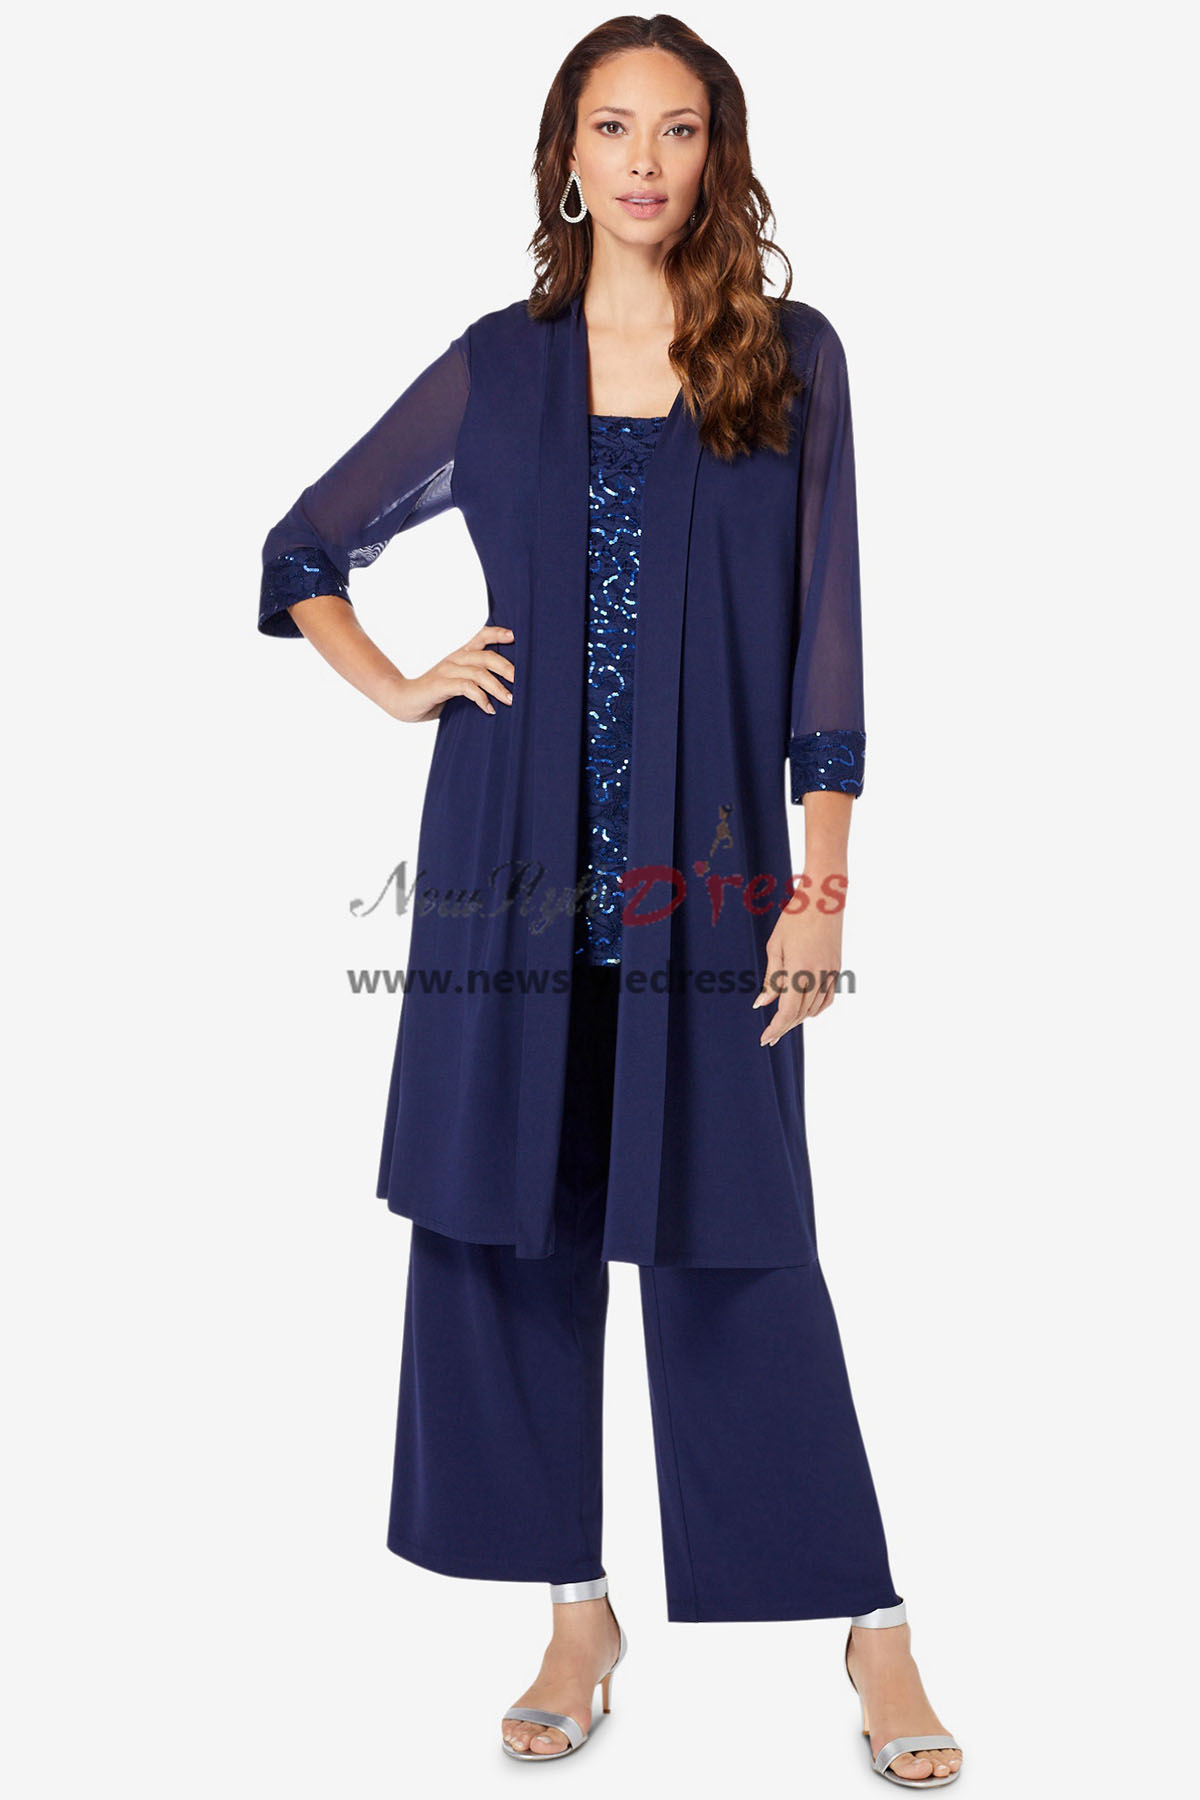 Elegant Three Piece Dark Navy Mother of the Bride Pant Suits with ...